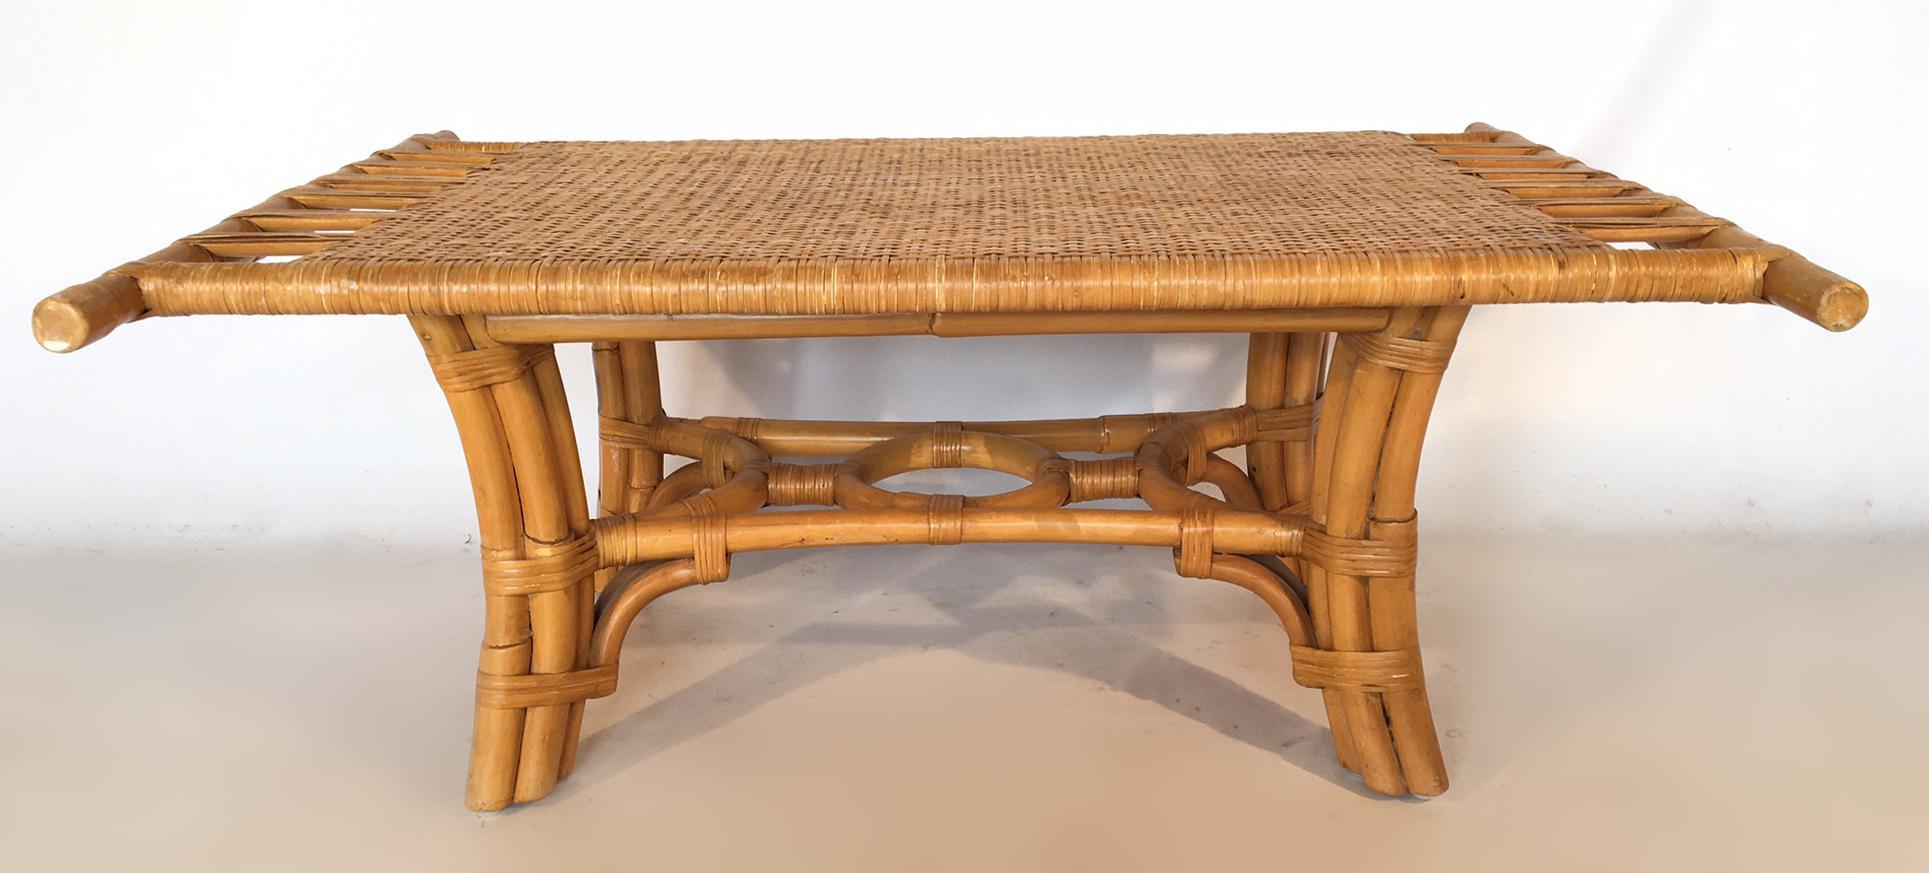 woven cane coffee table